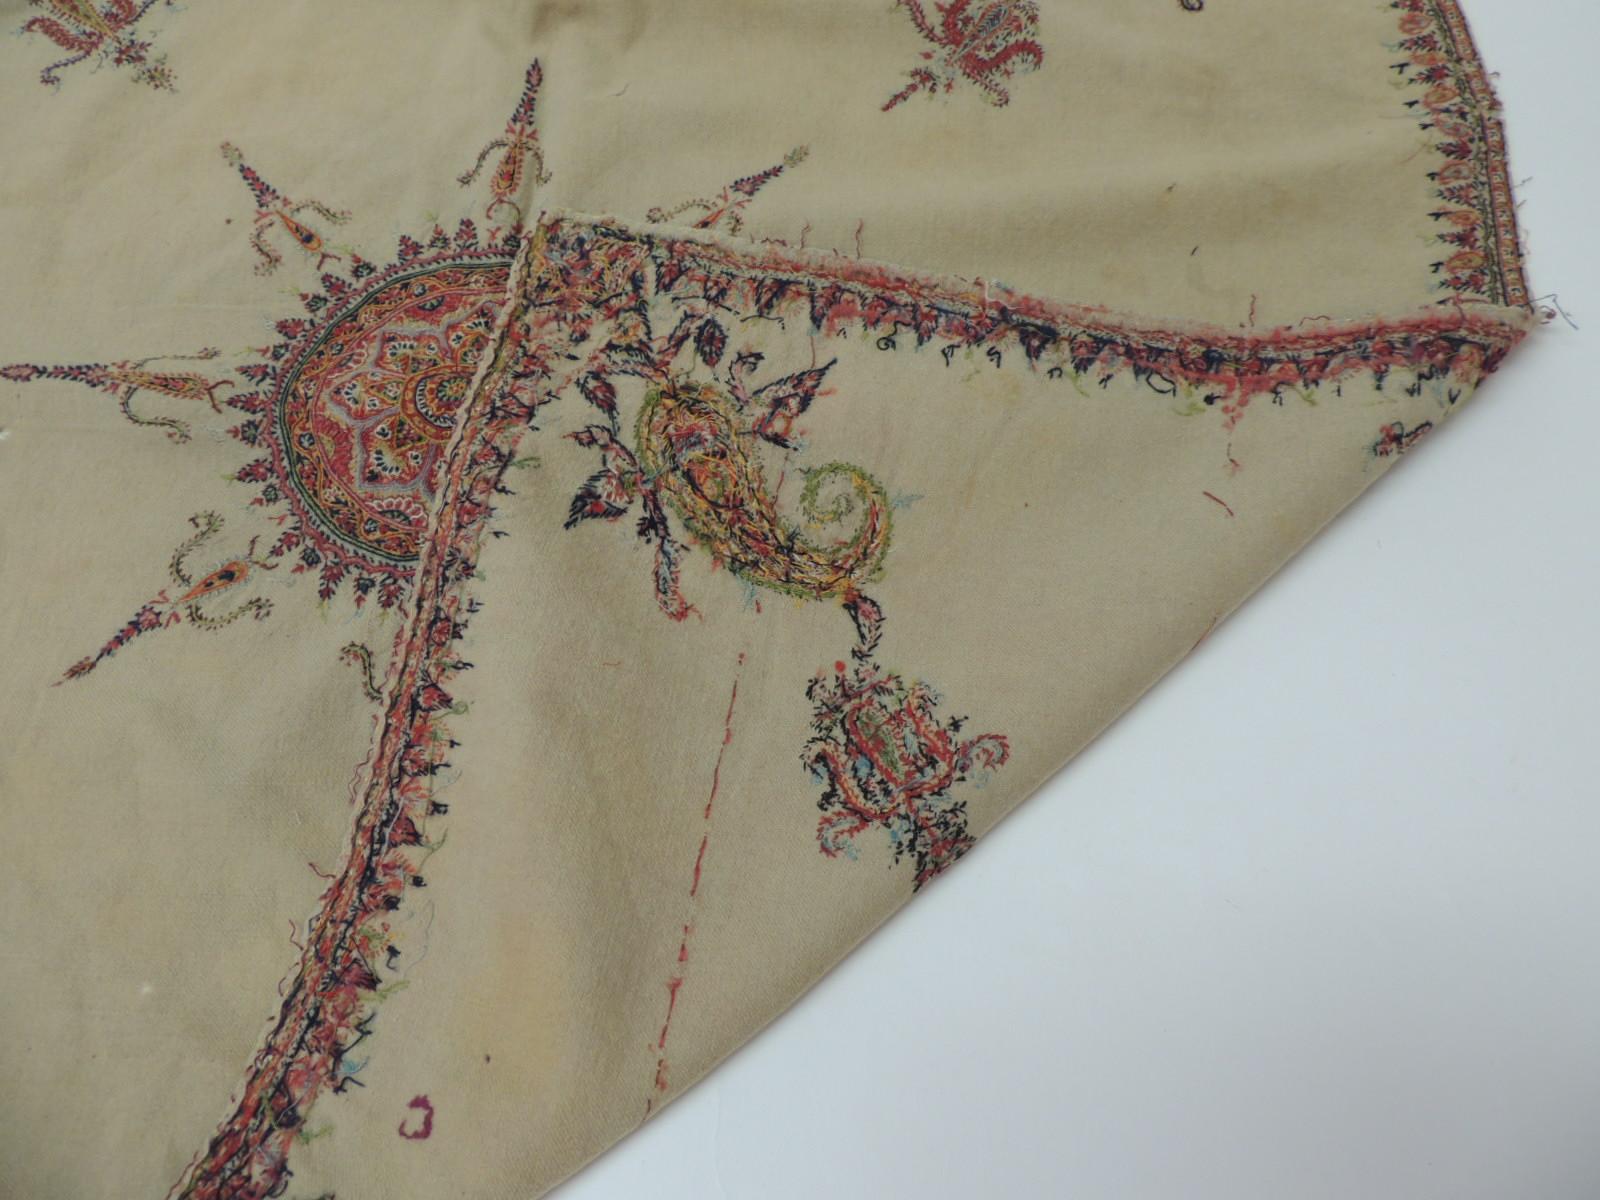 Hand-Crafted 19th Century Red and Green Indian Paisley Embroidery Cloth